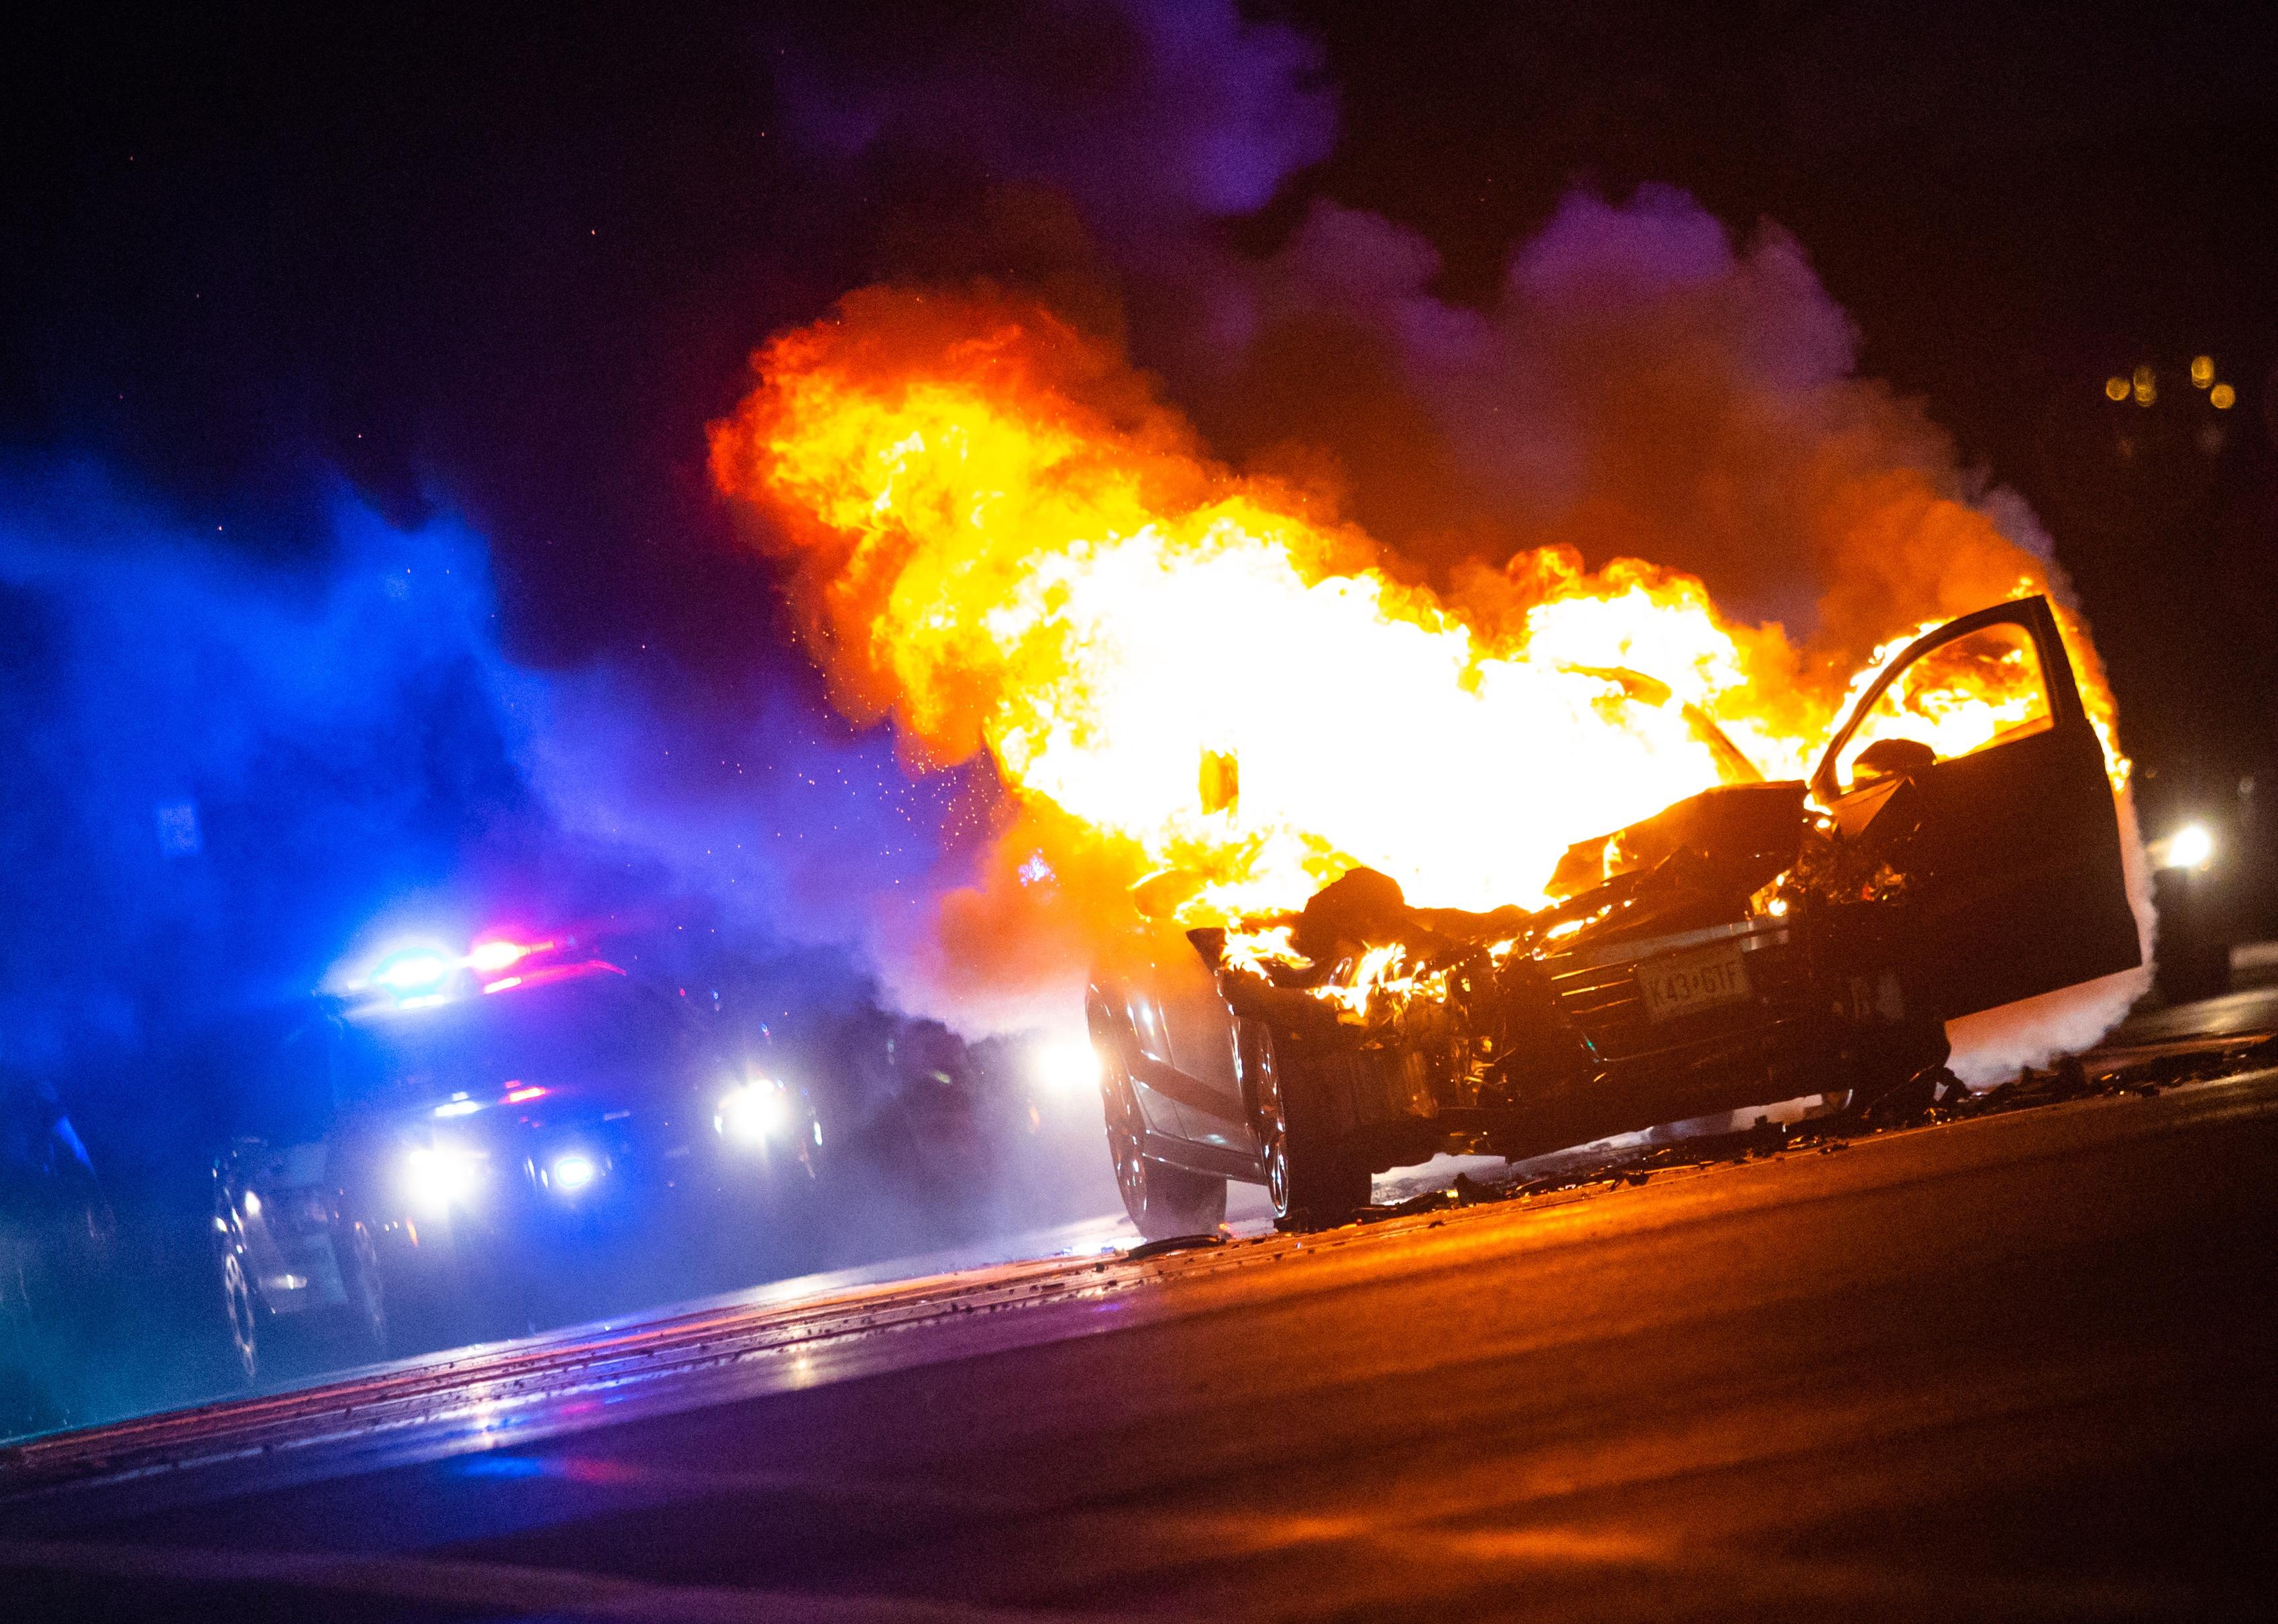 Car on fire at night with police lights in background.